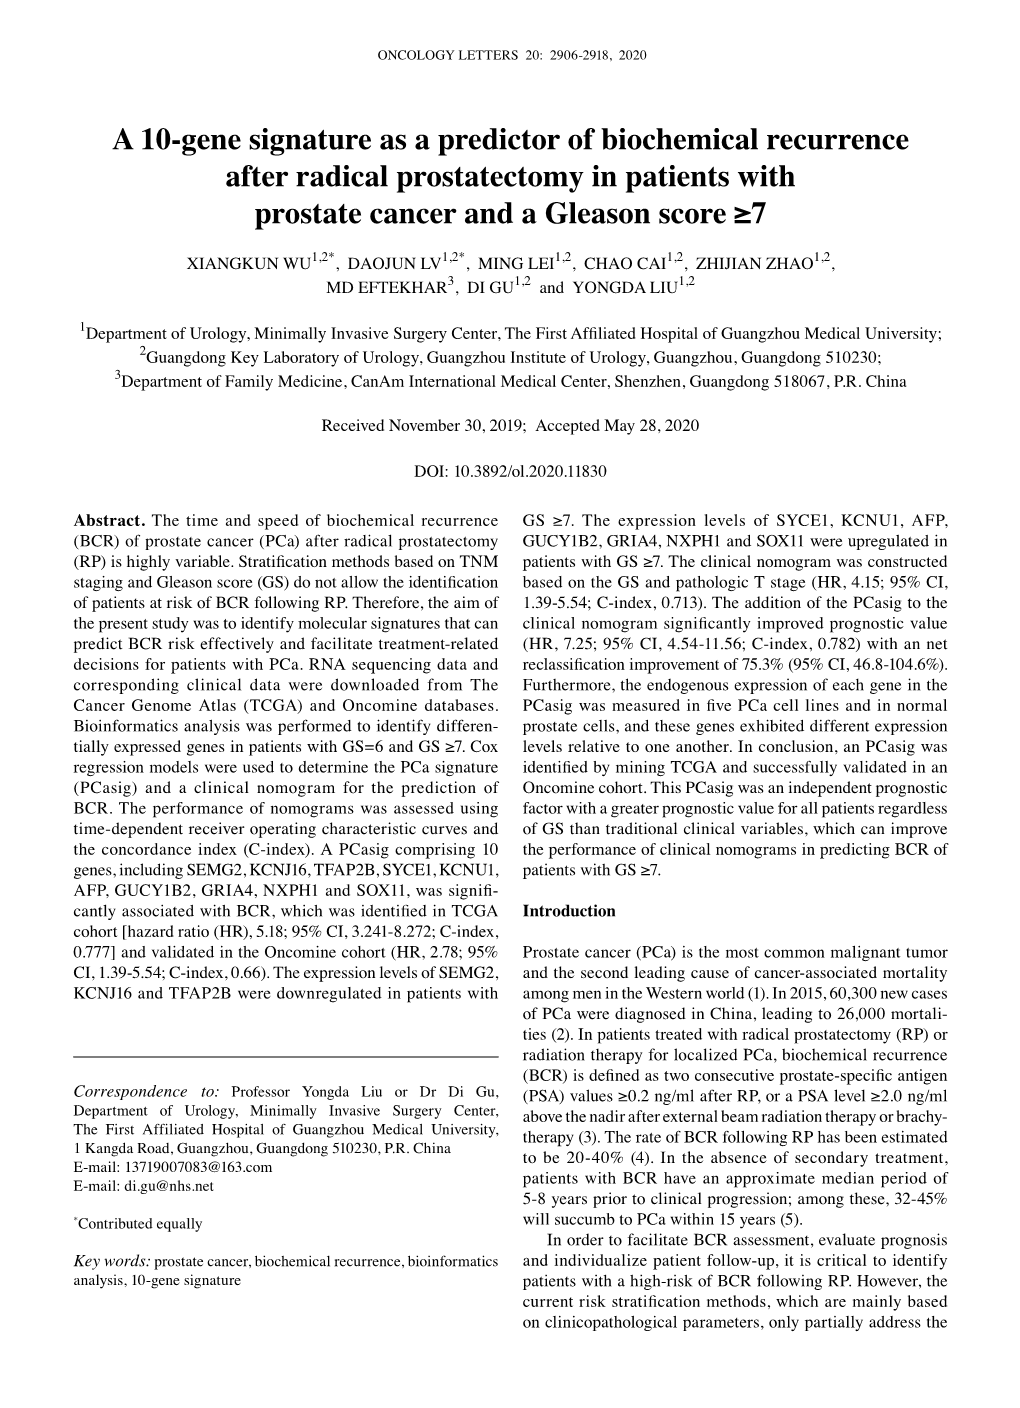 A 10‑Gene Signature As a Predictor of Biochemical Recurrence After Radical Prostatectomy in Patients with Prostate Cancer and a Gleason Score ≥7